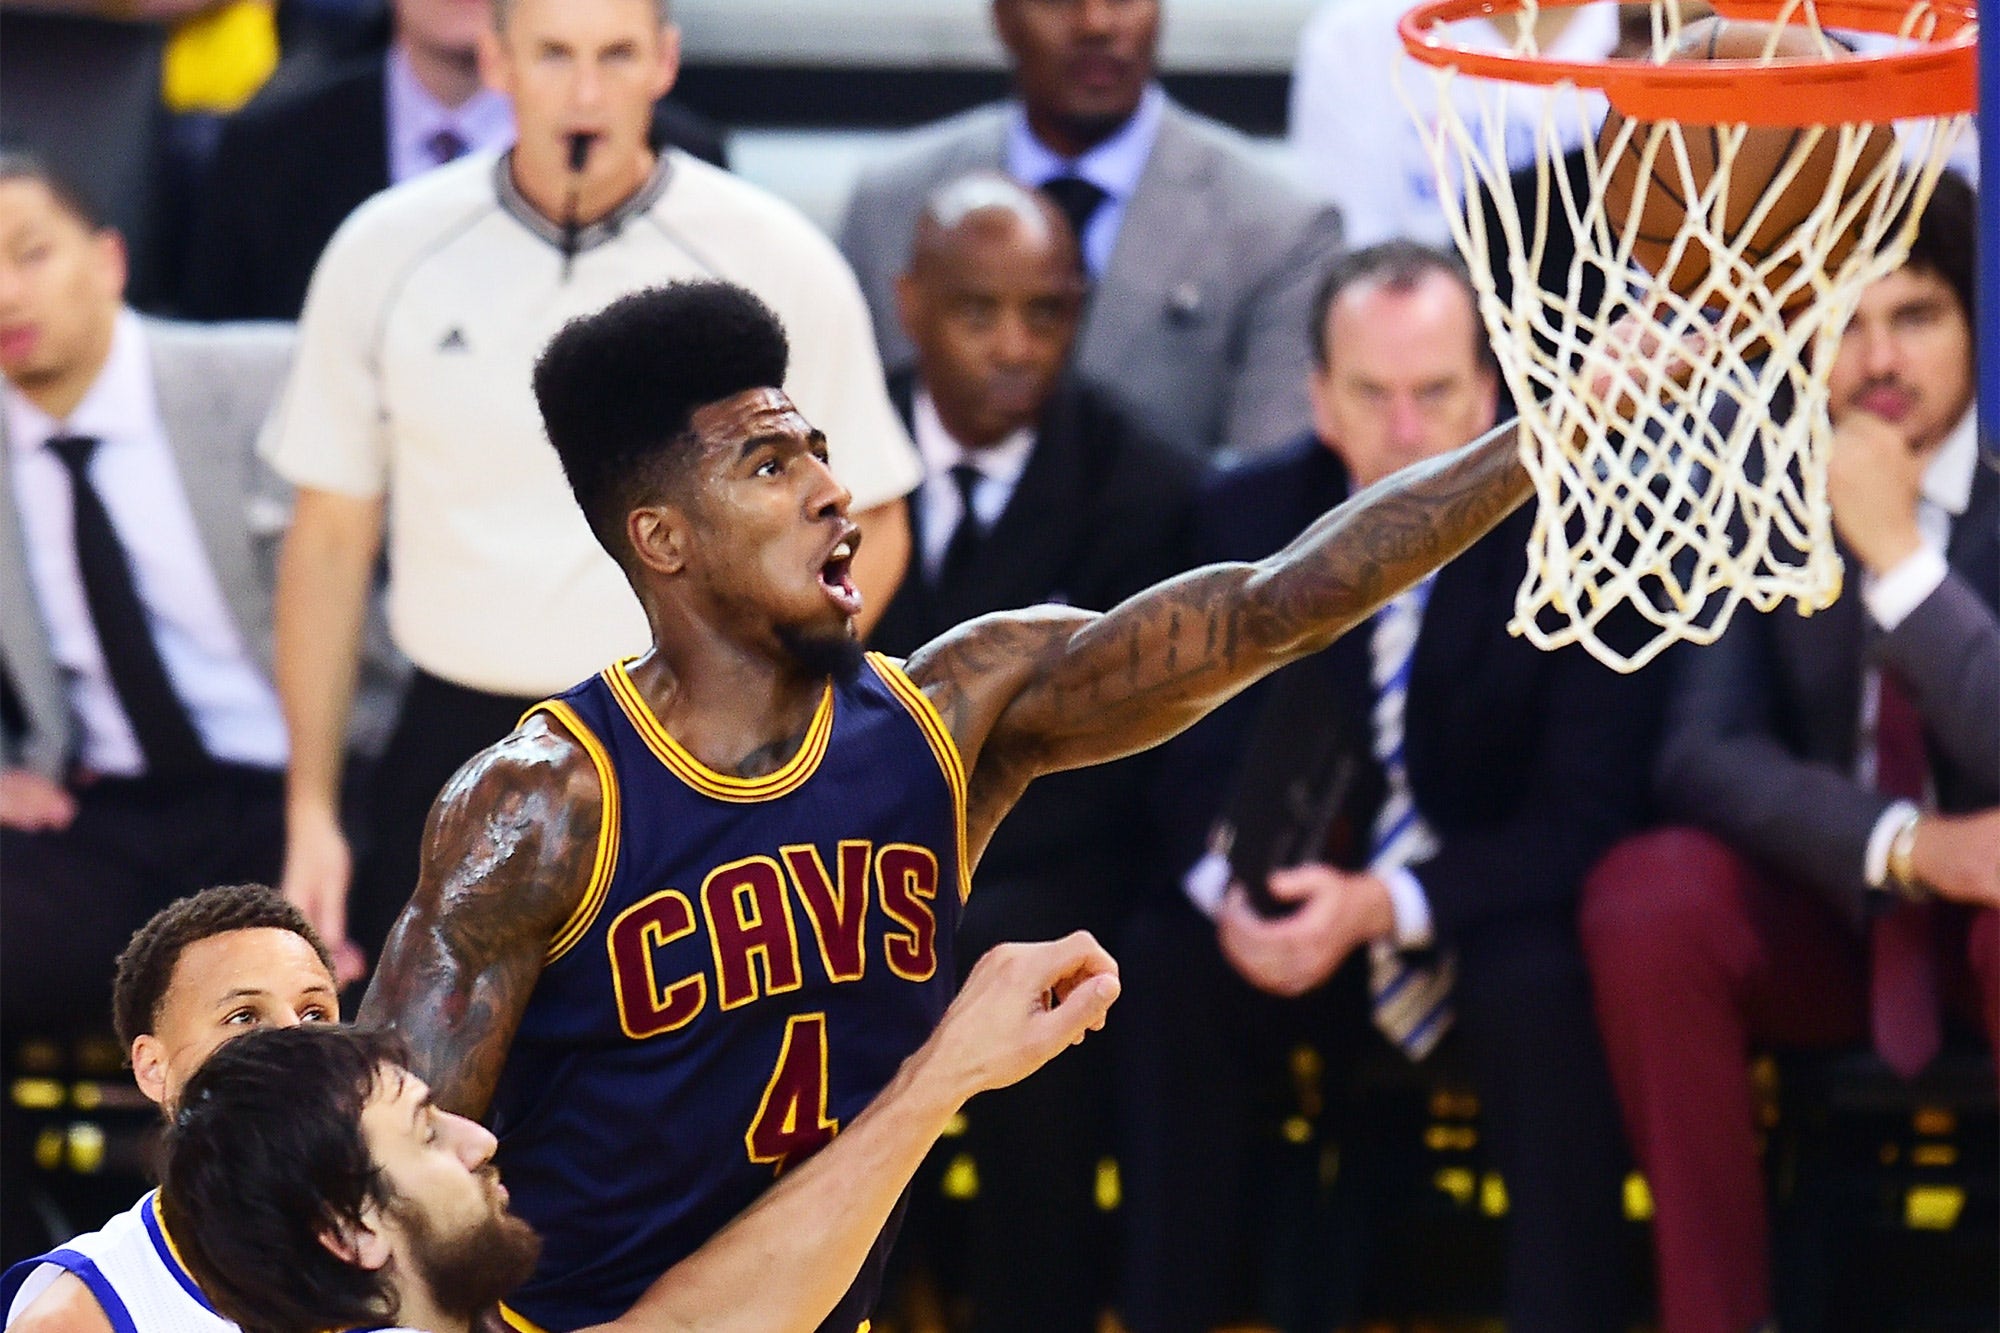 Cavaliers guard Iman Shumpert showed he has more than basketball skills by ...